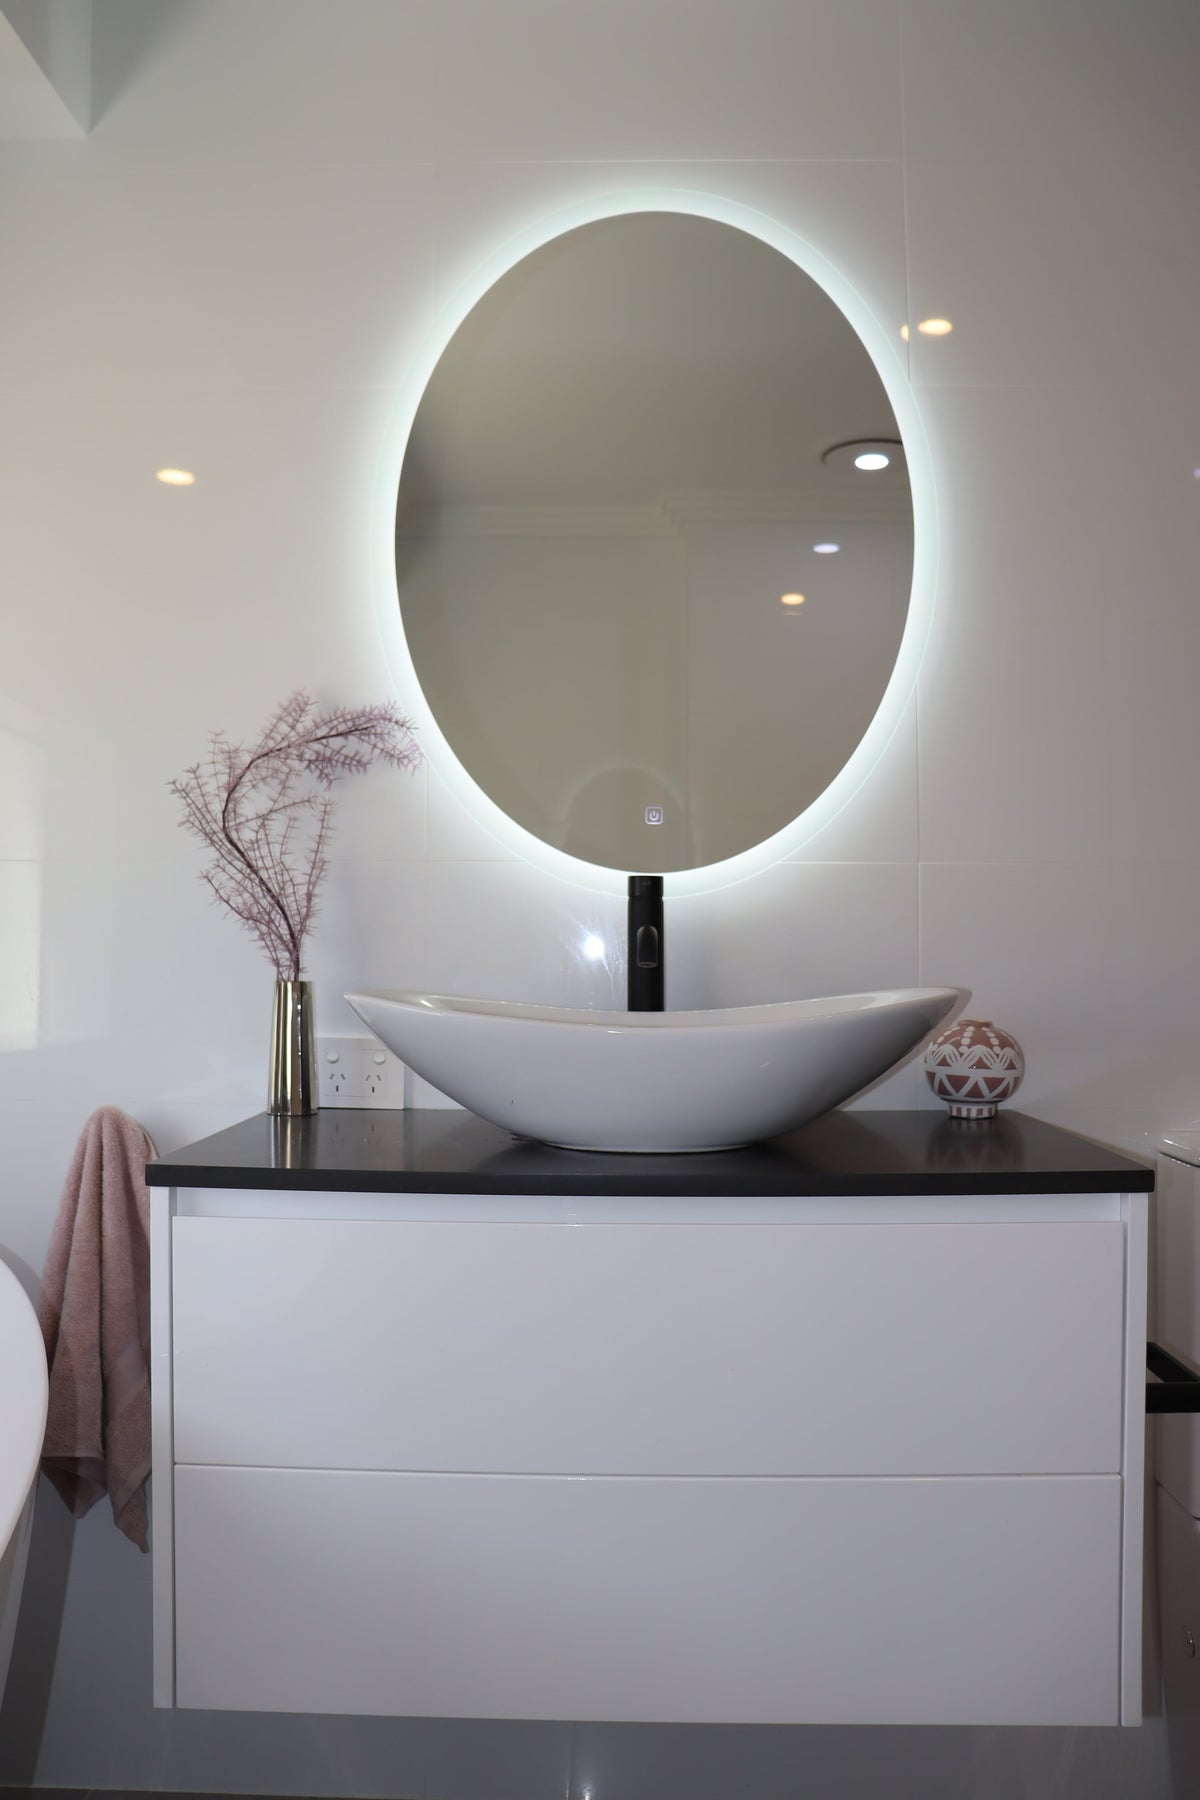 Soothing Light from Backlit Oval LED Mirror above Wall-Mounted Vanity Cabinet in White Bathroom